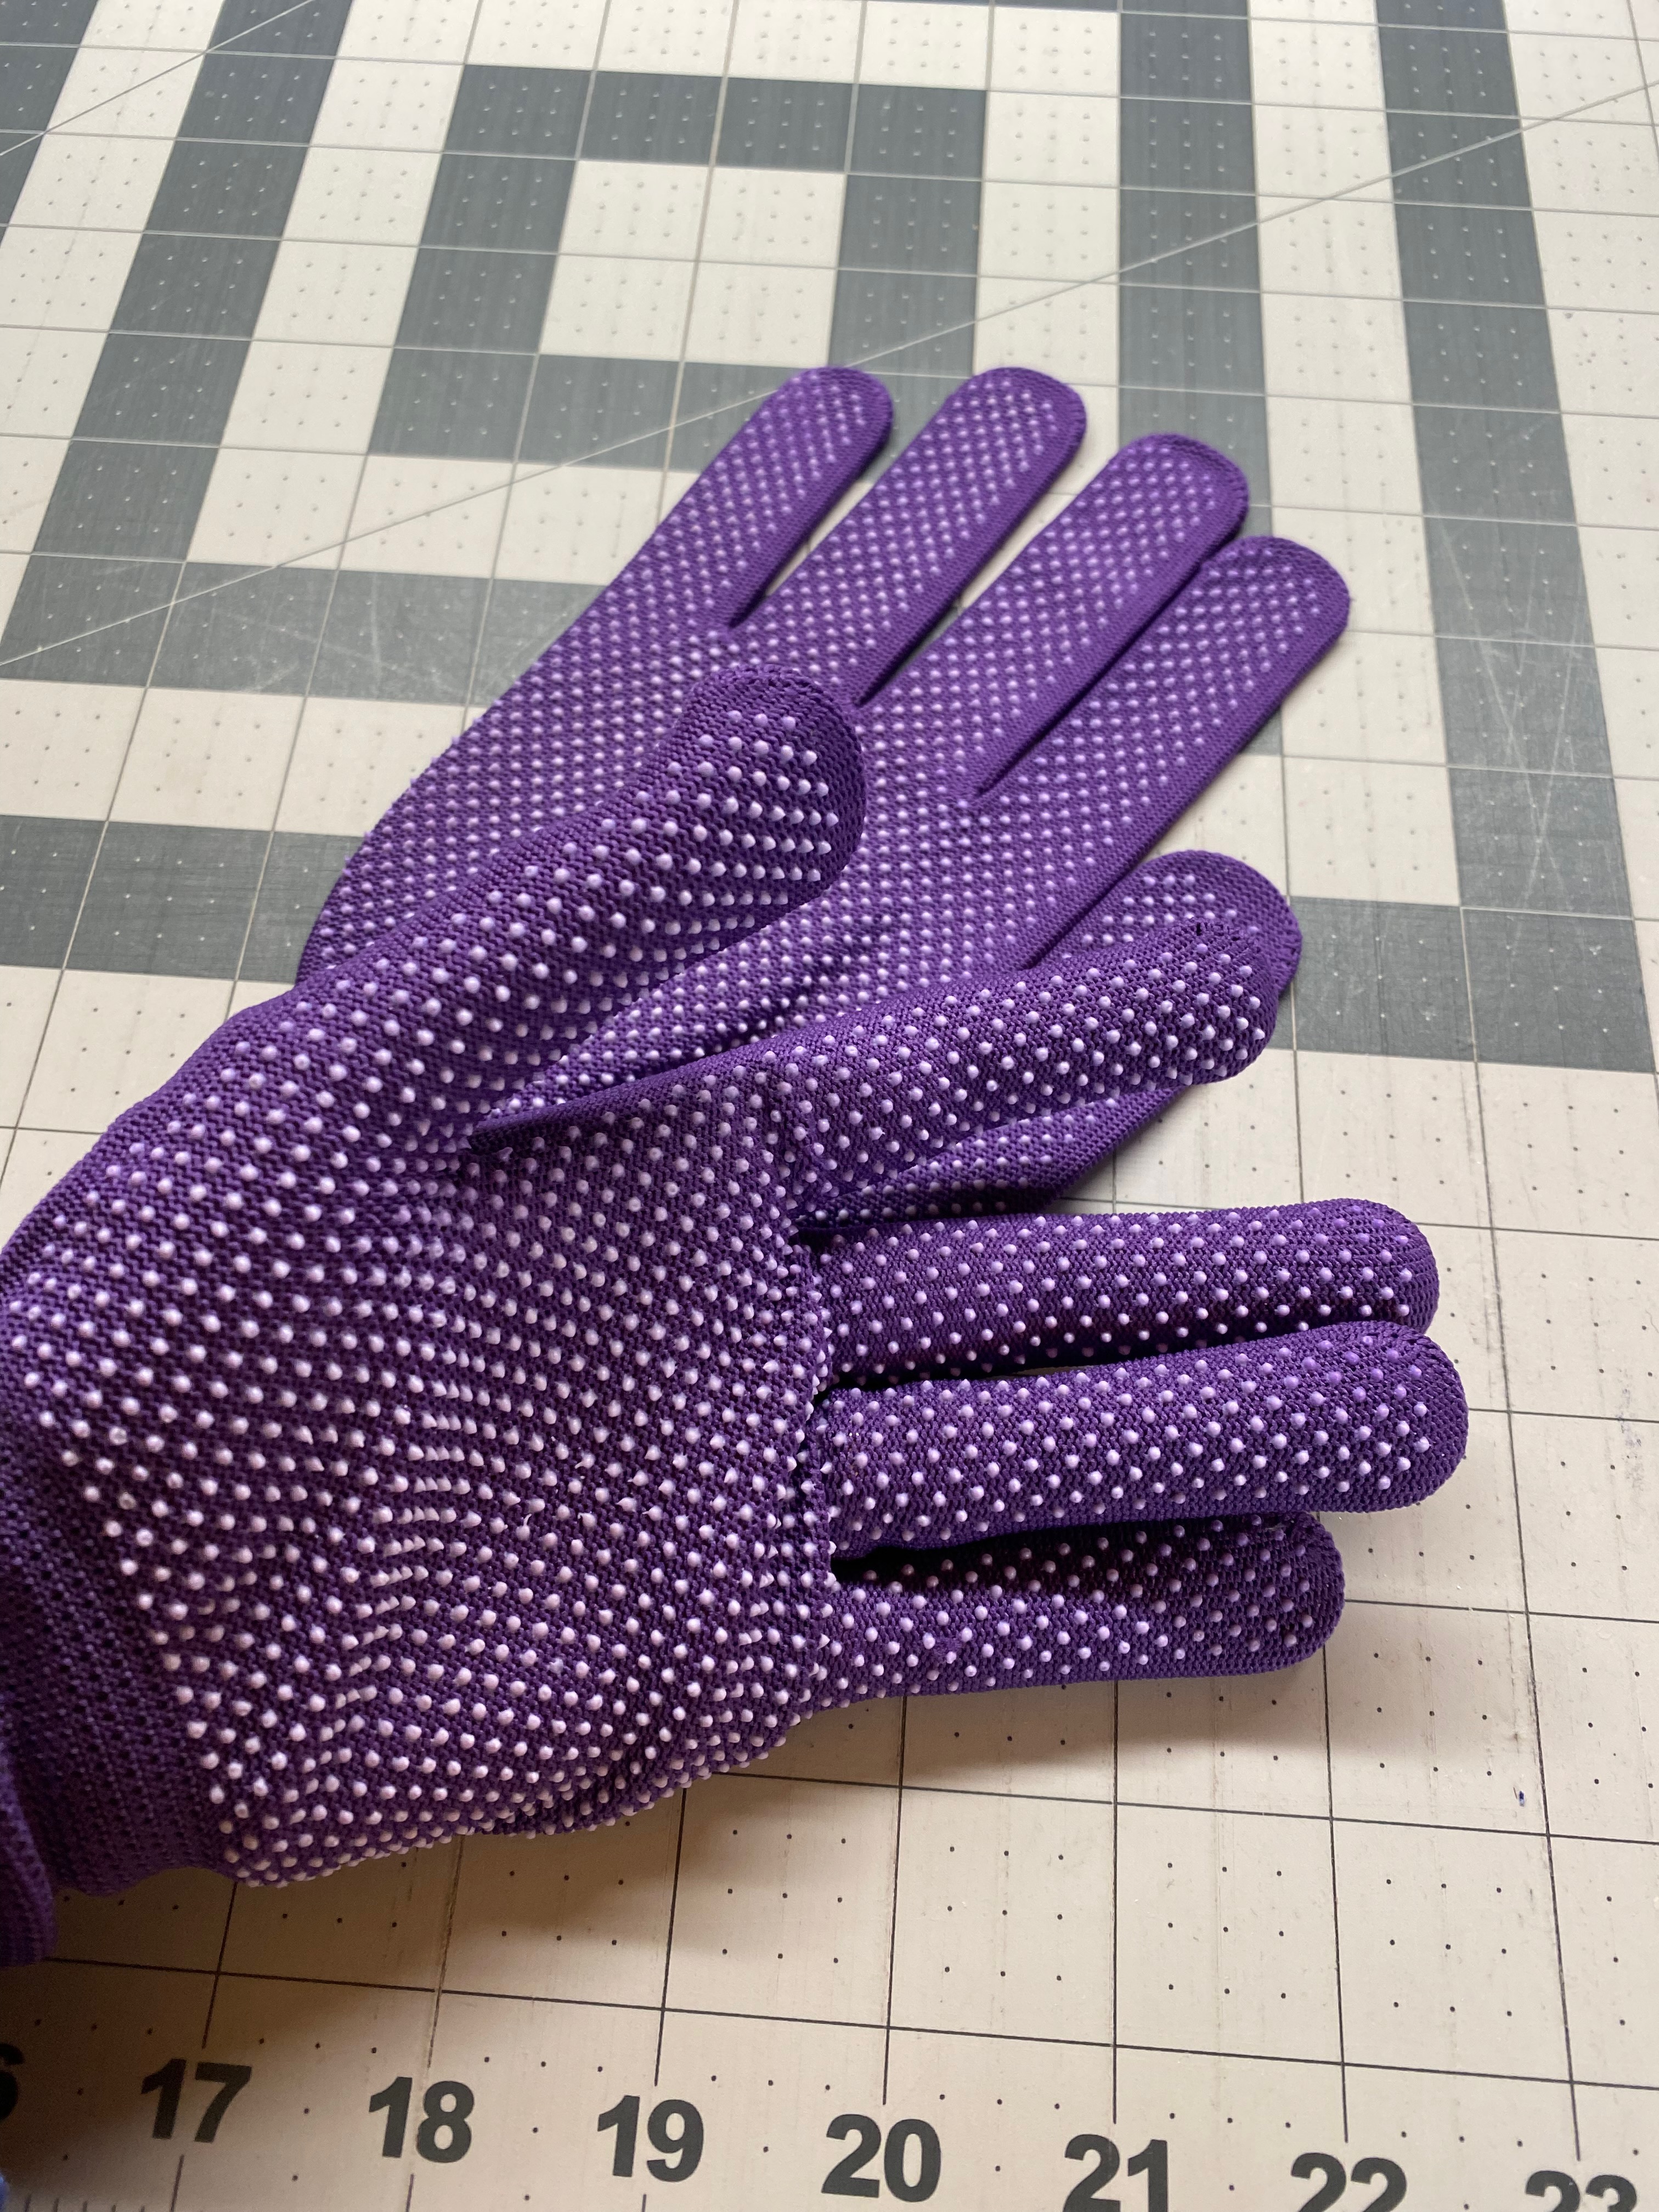 Gypsy Quilter - Hold Steady Quilting Gloves for Free Motion Quilting - Dots on Palm and Fingers - Image - Quiltblox.com